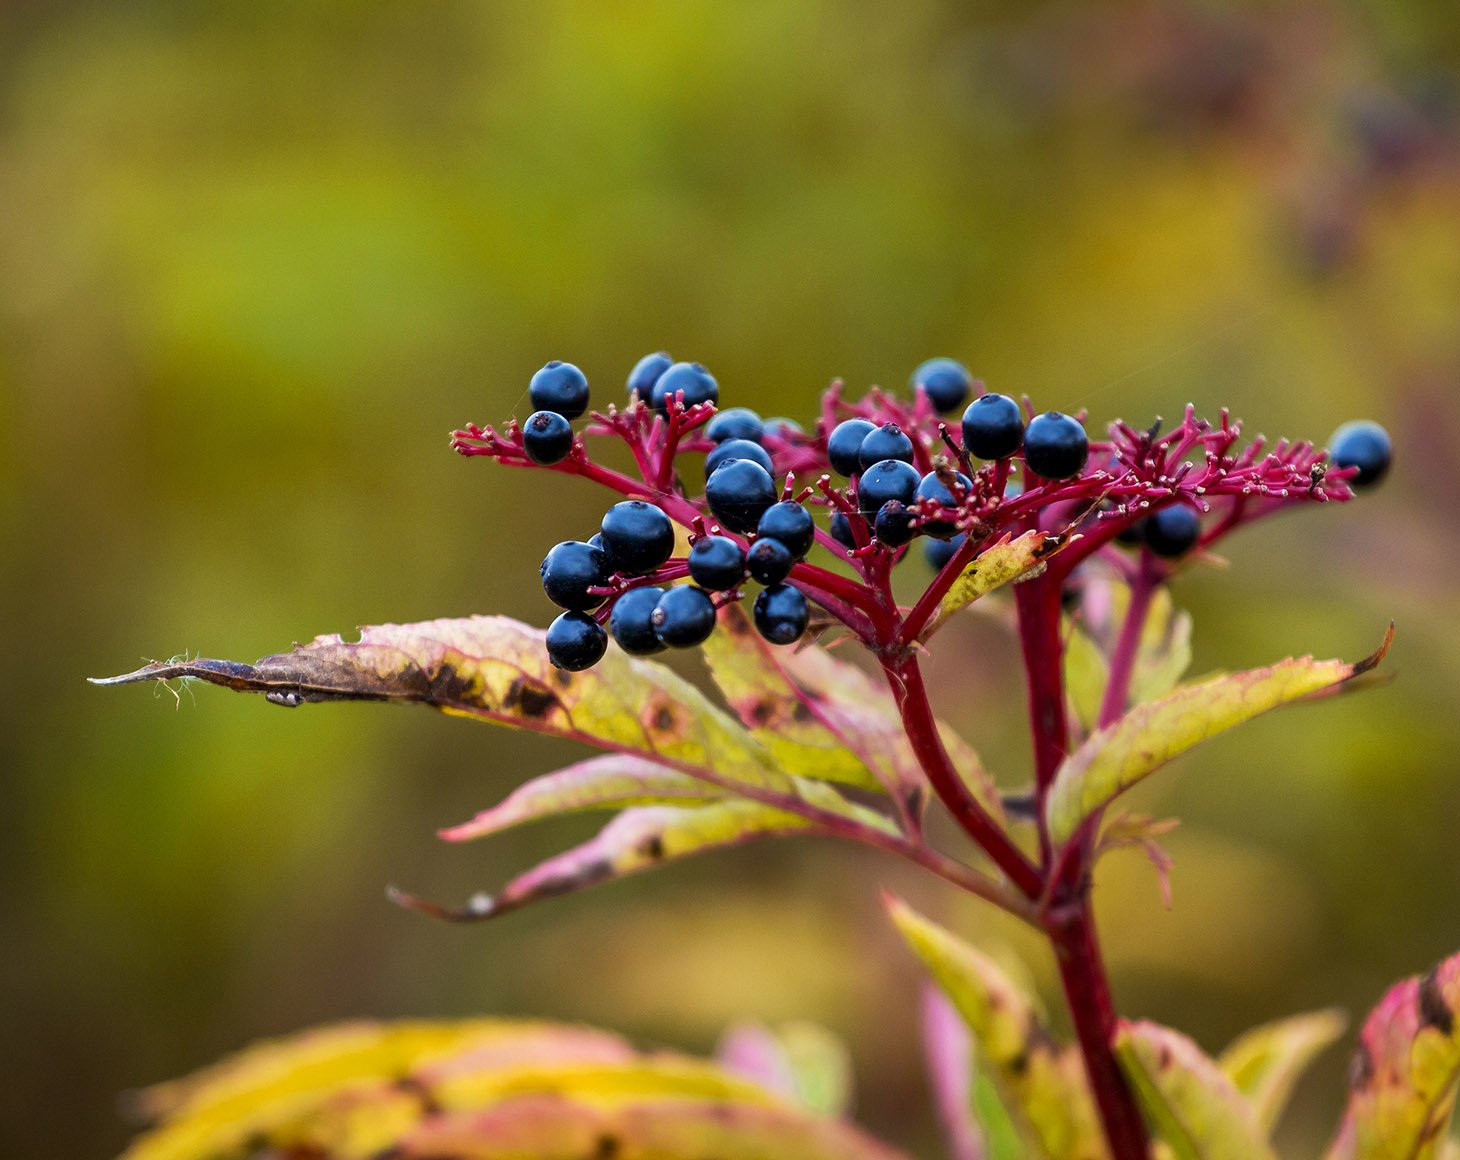 Elderberry branch with black berries on a blurred autumn background